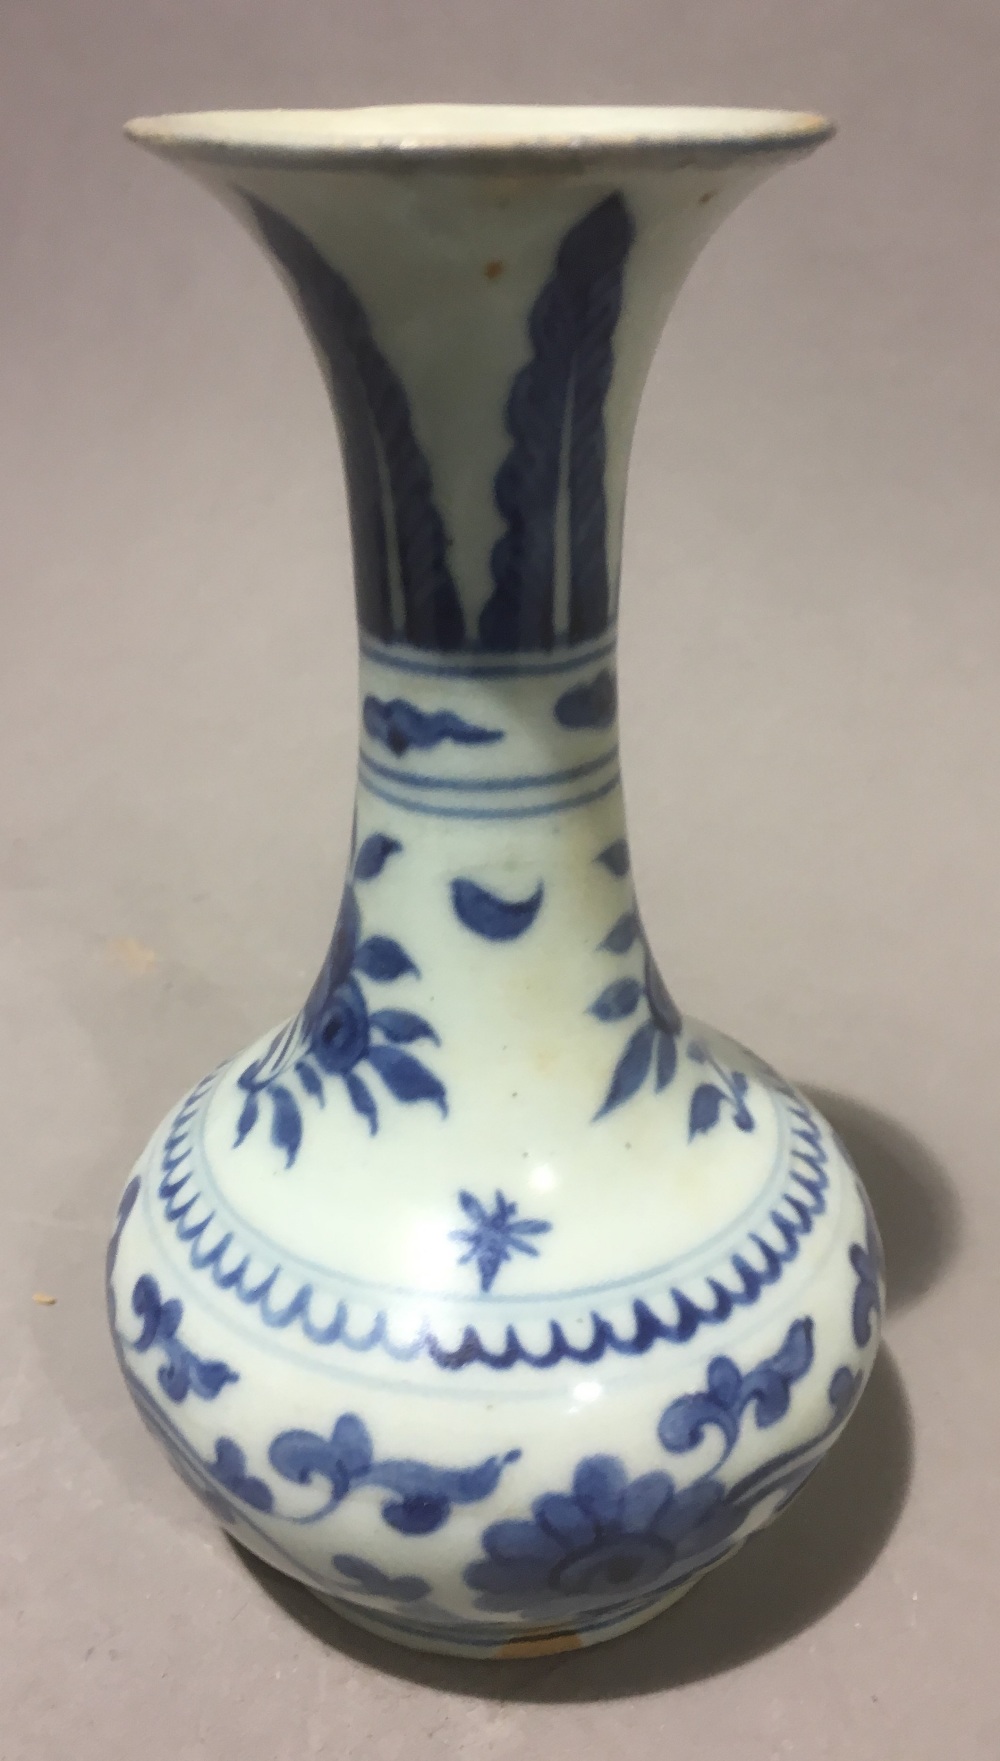 A Chinese blue and white porcelain baluster vase, decorated with floral sprays and lotus strapwork. - Image 4 of 7